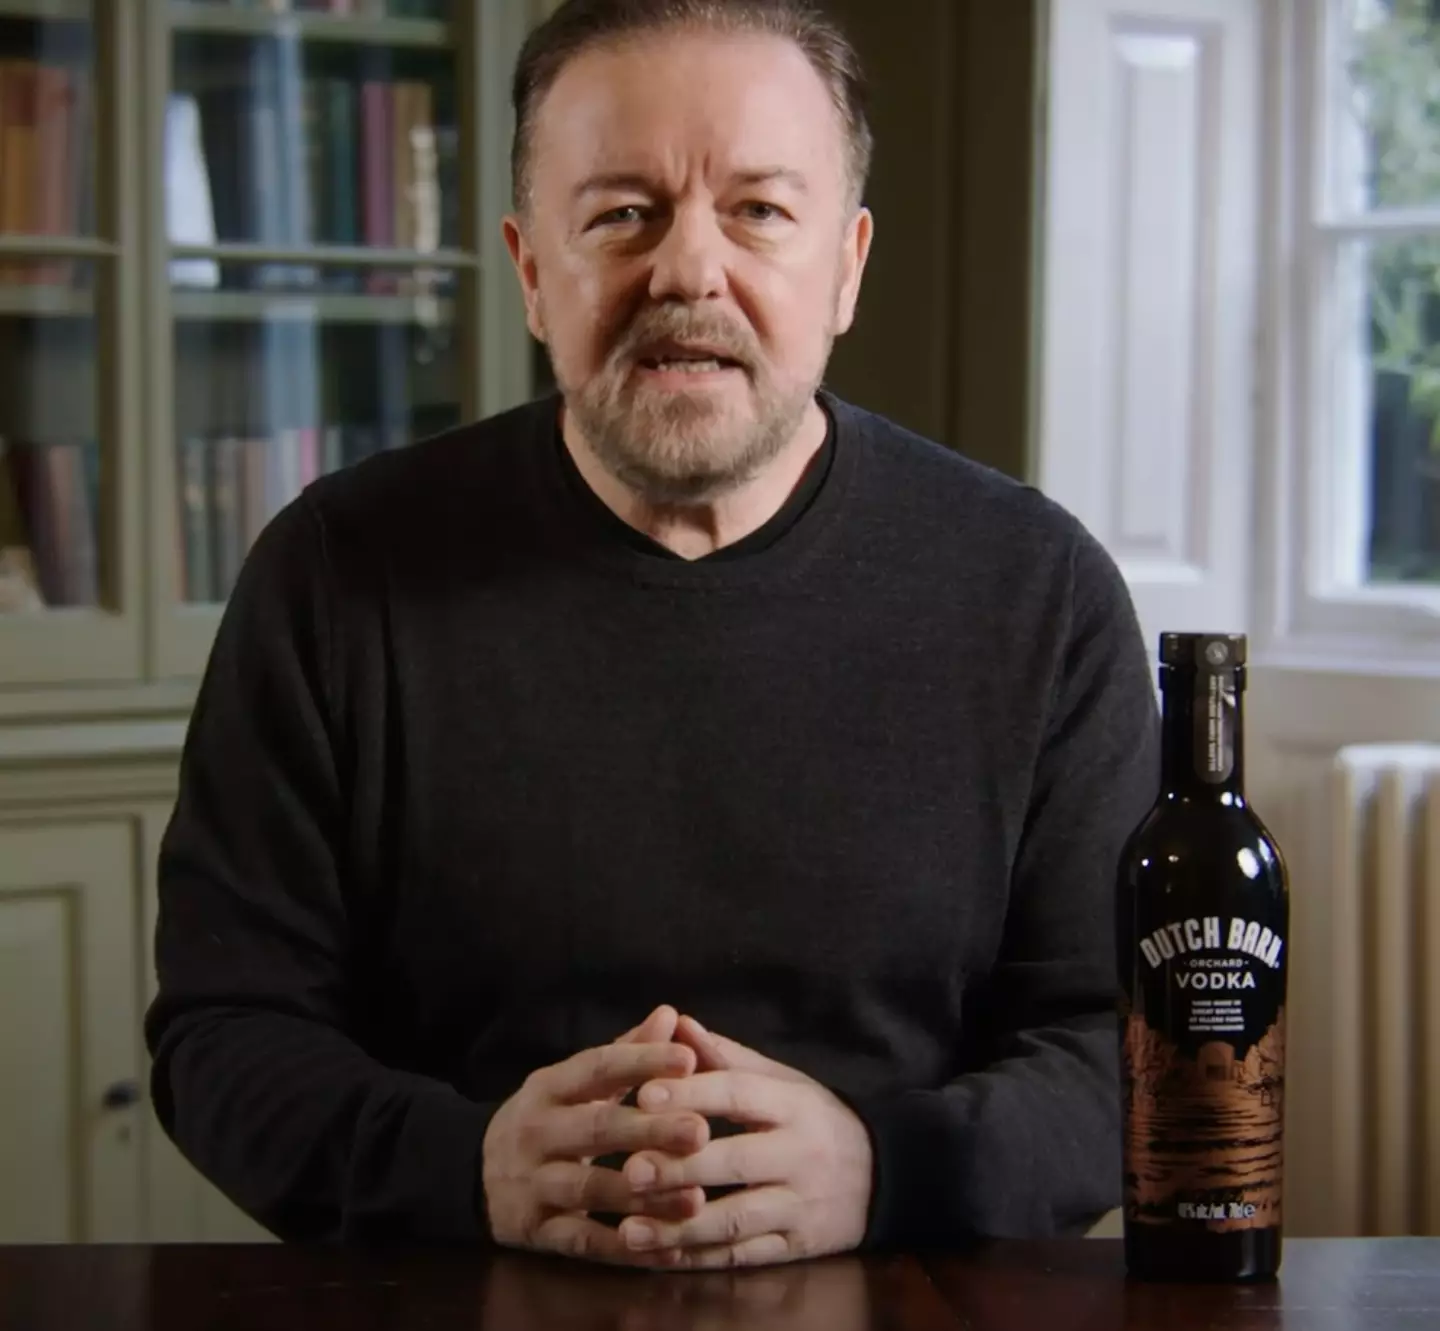 Fans praised Gervais for his very honest bit of marketing.